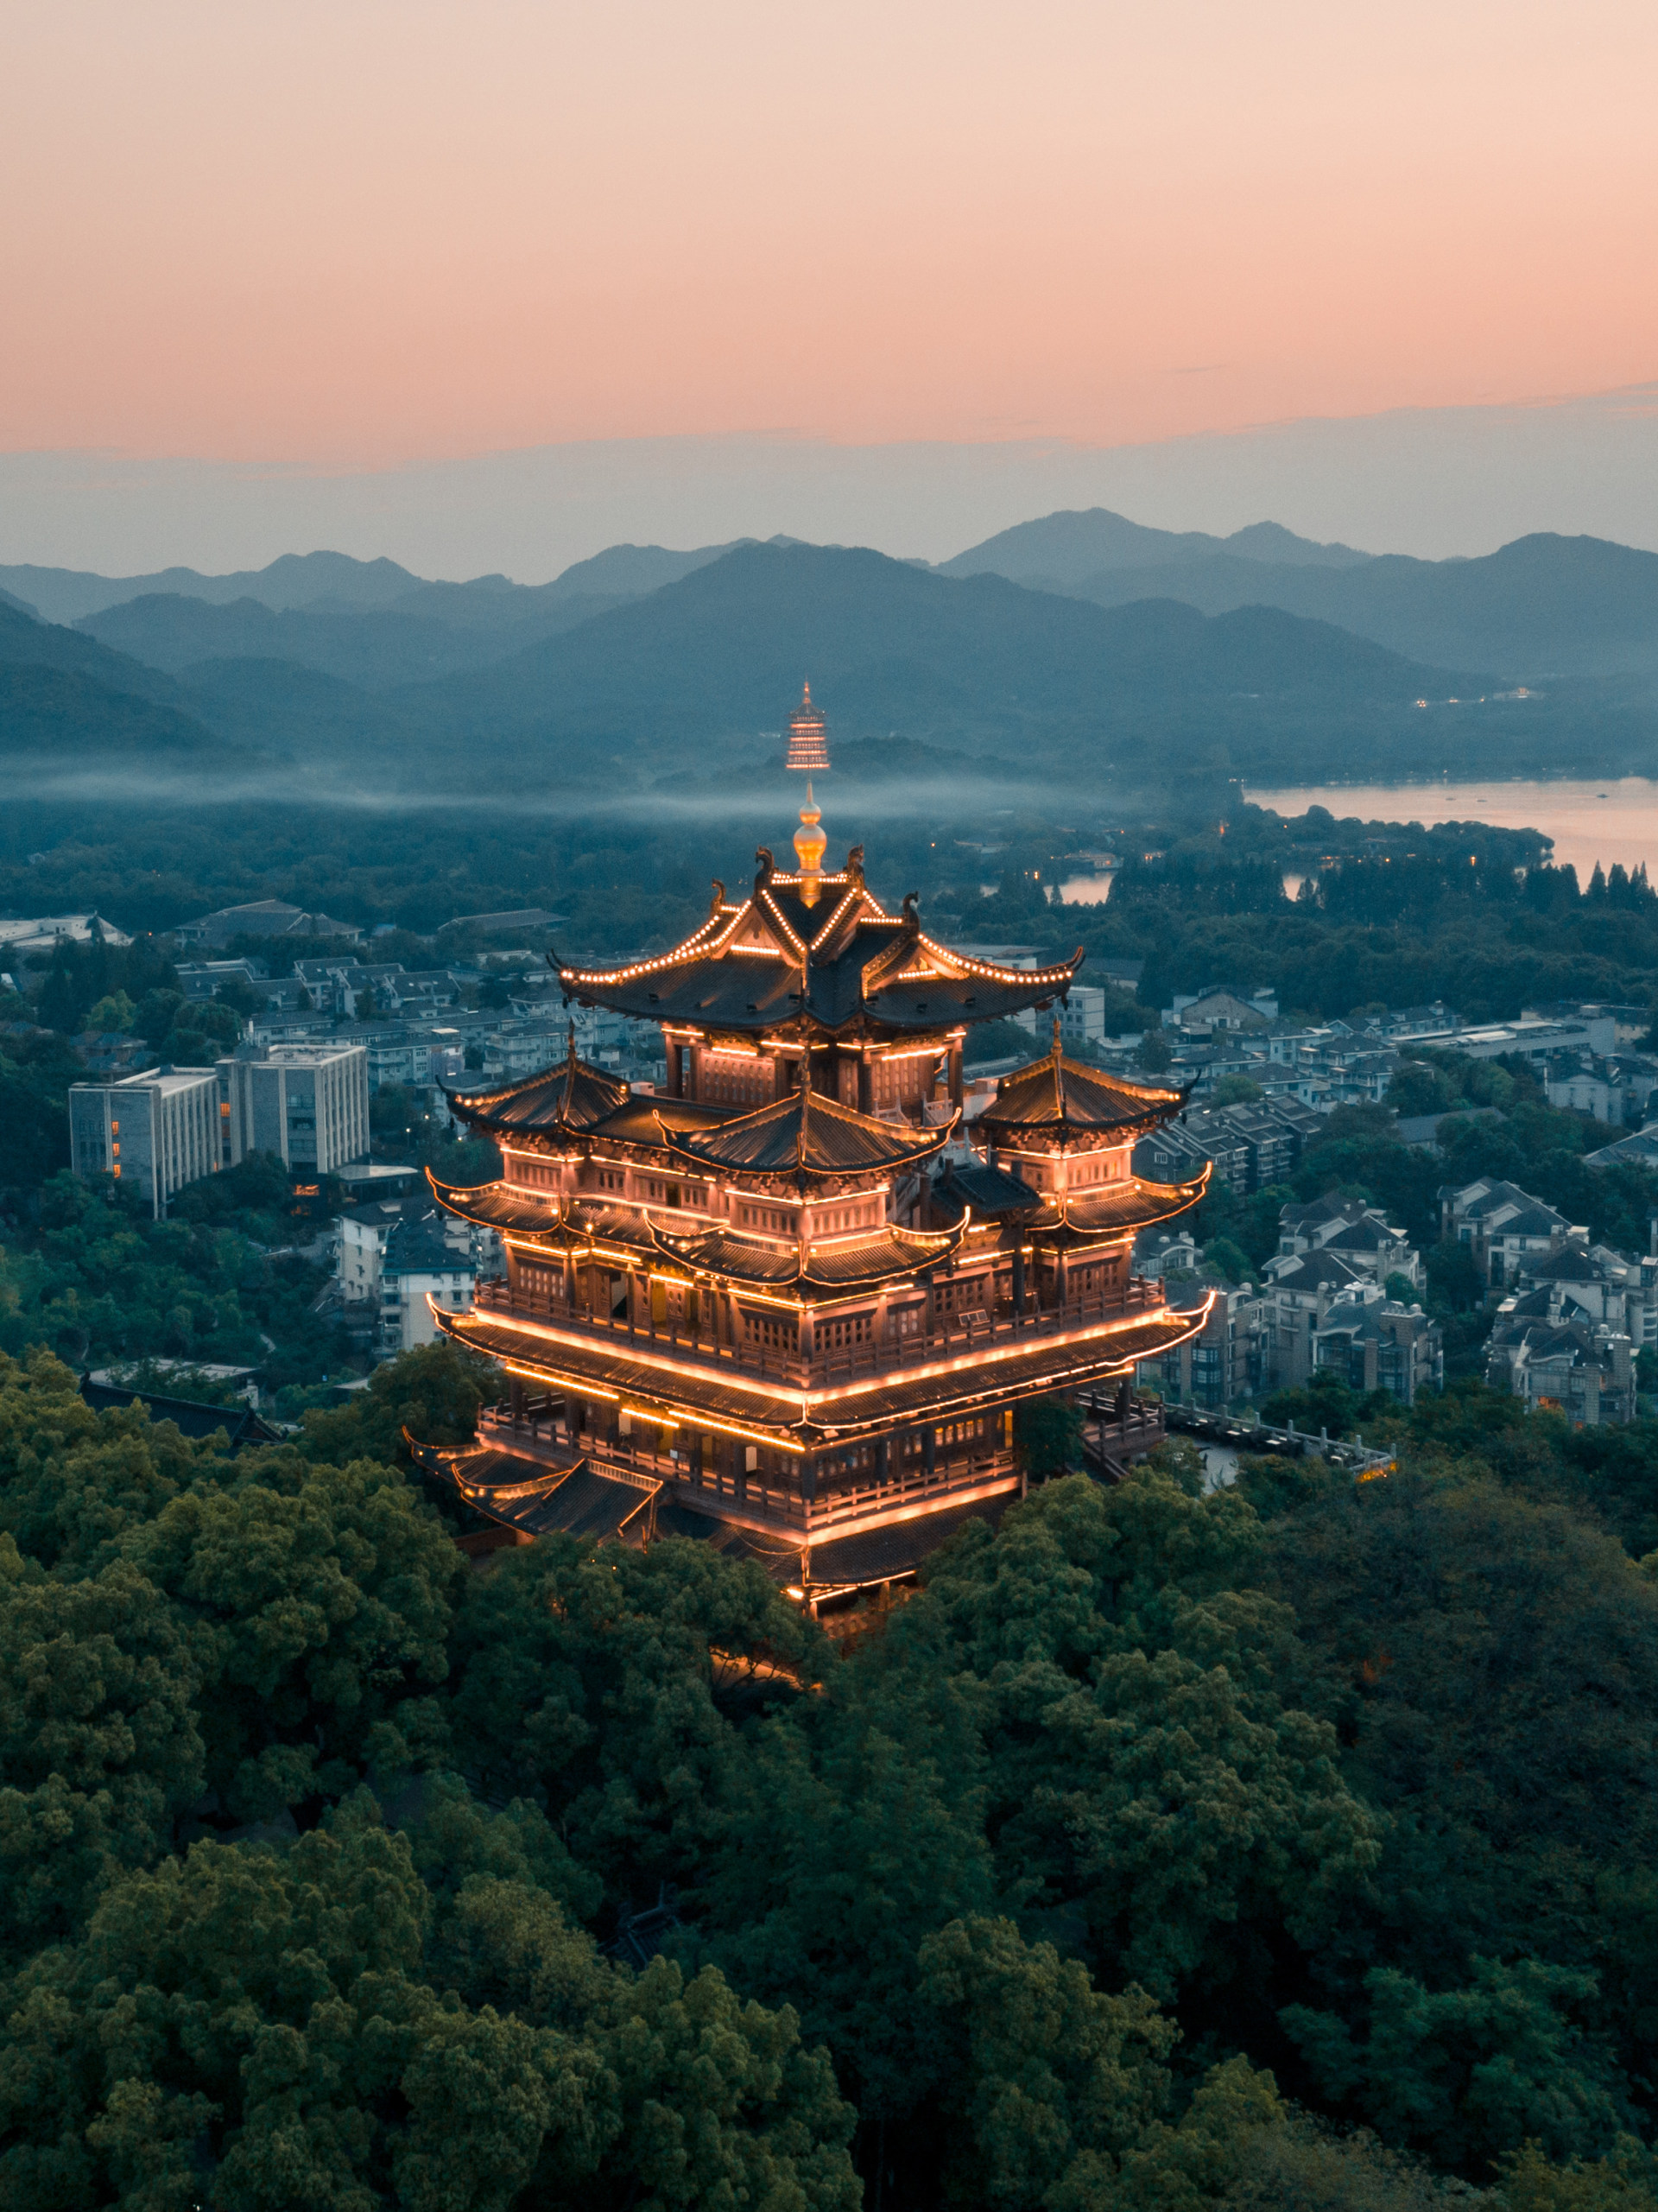 overview, temple, cities, architecture, city, building, review, pagoda